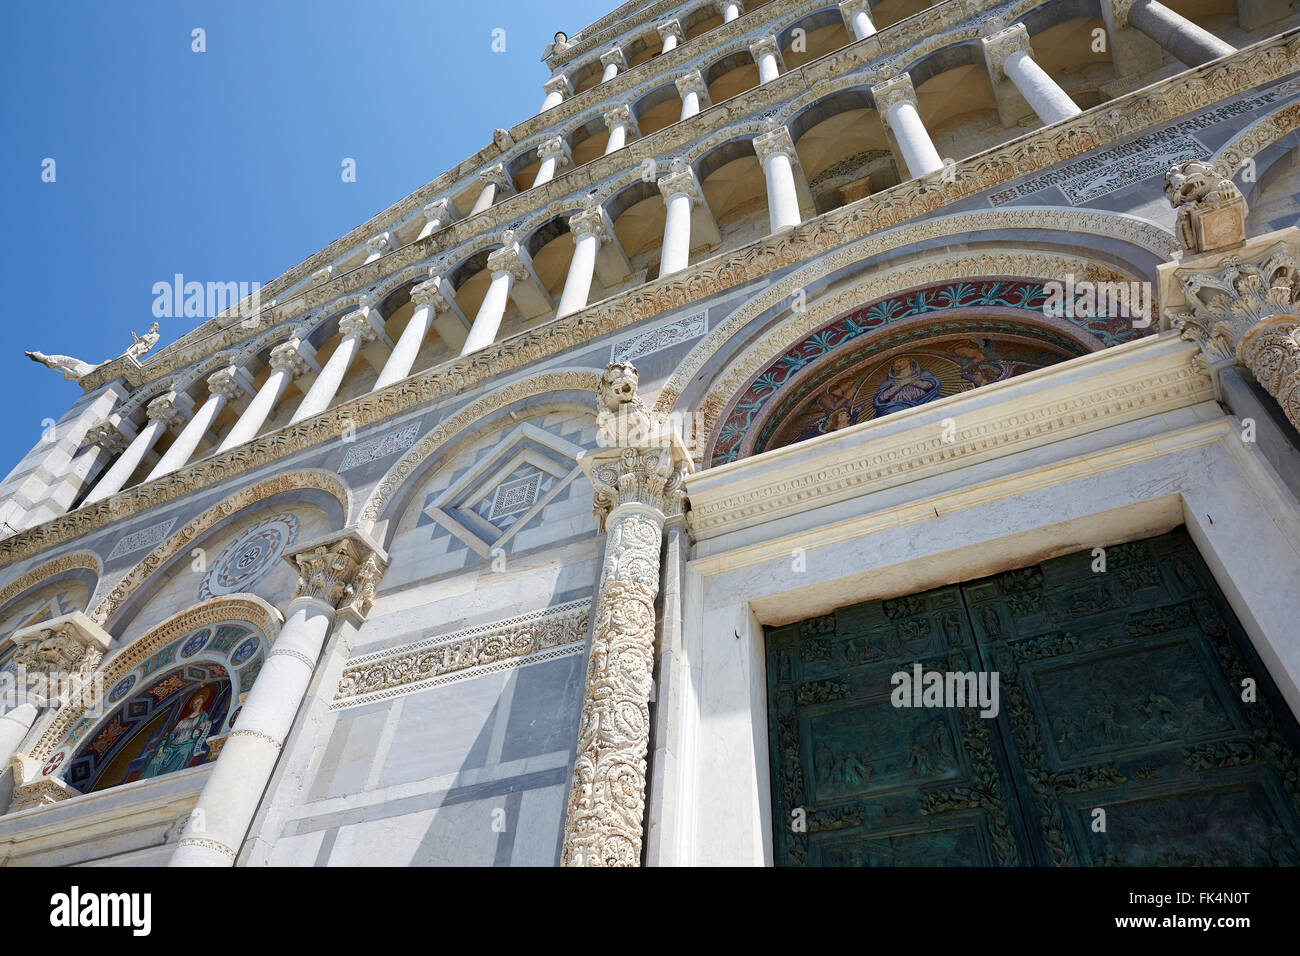 ITALY PISA ARCHITECTURE ARCHITECTURAL DETAIL Stock Photo